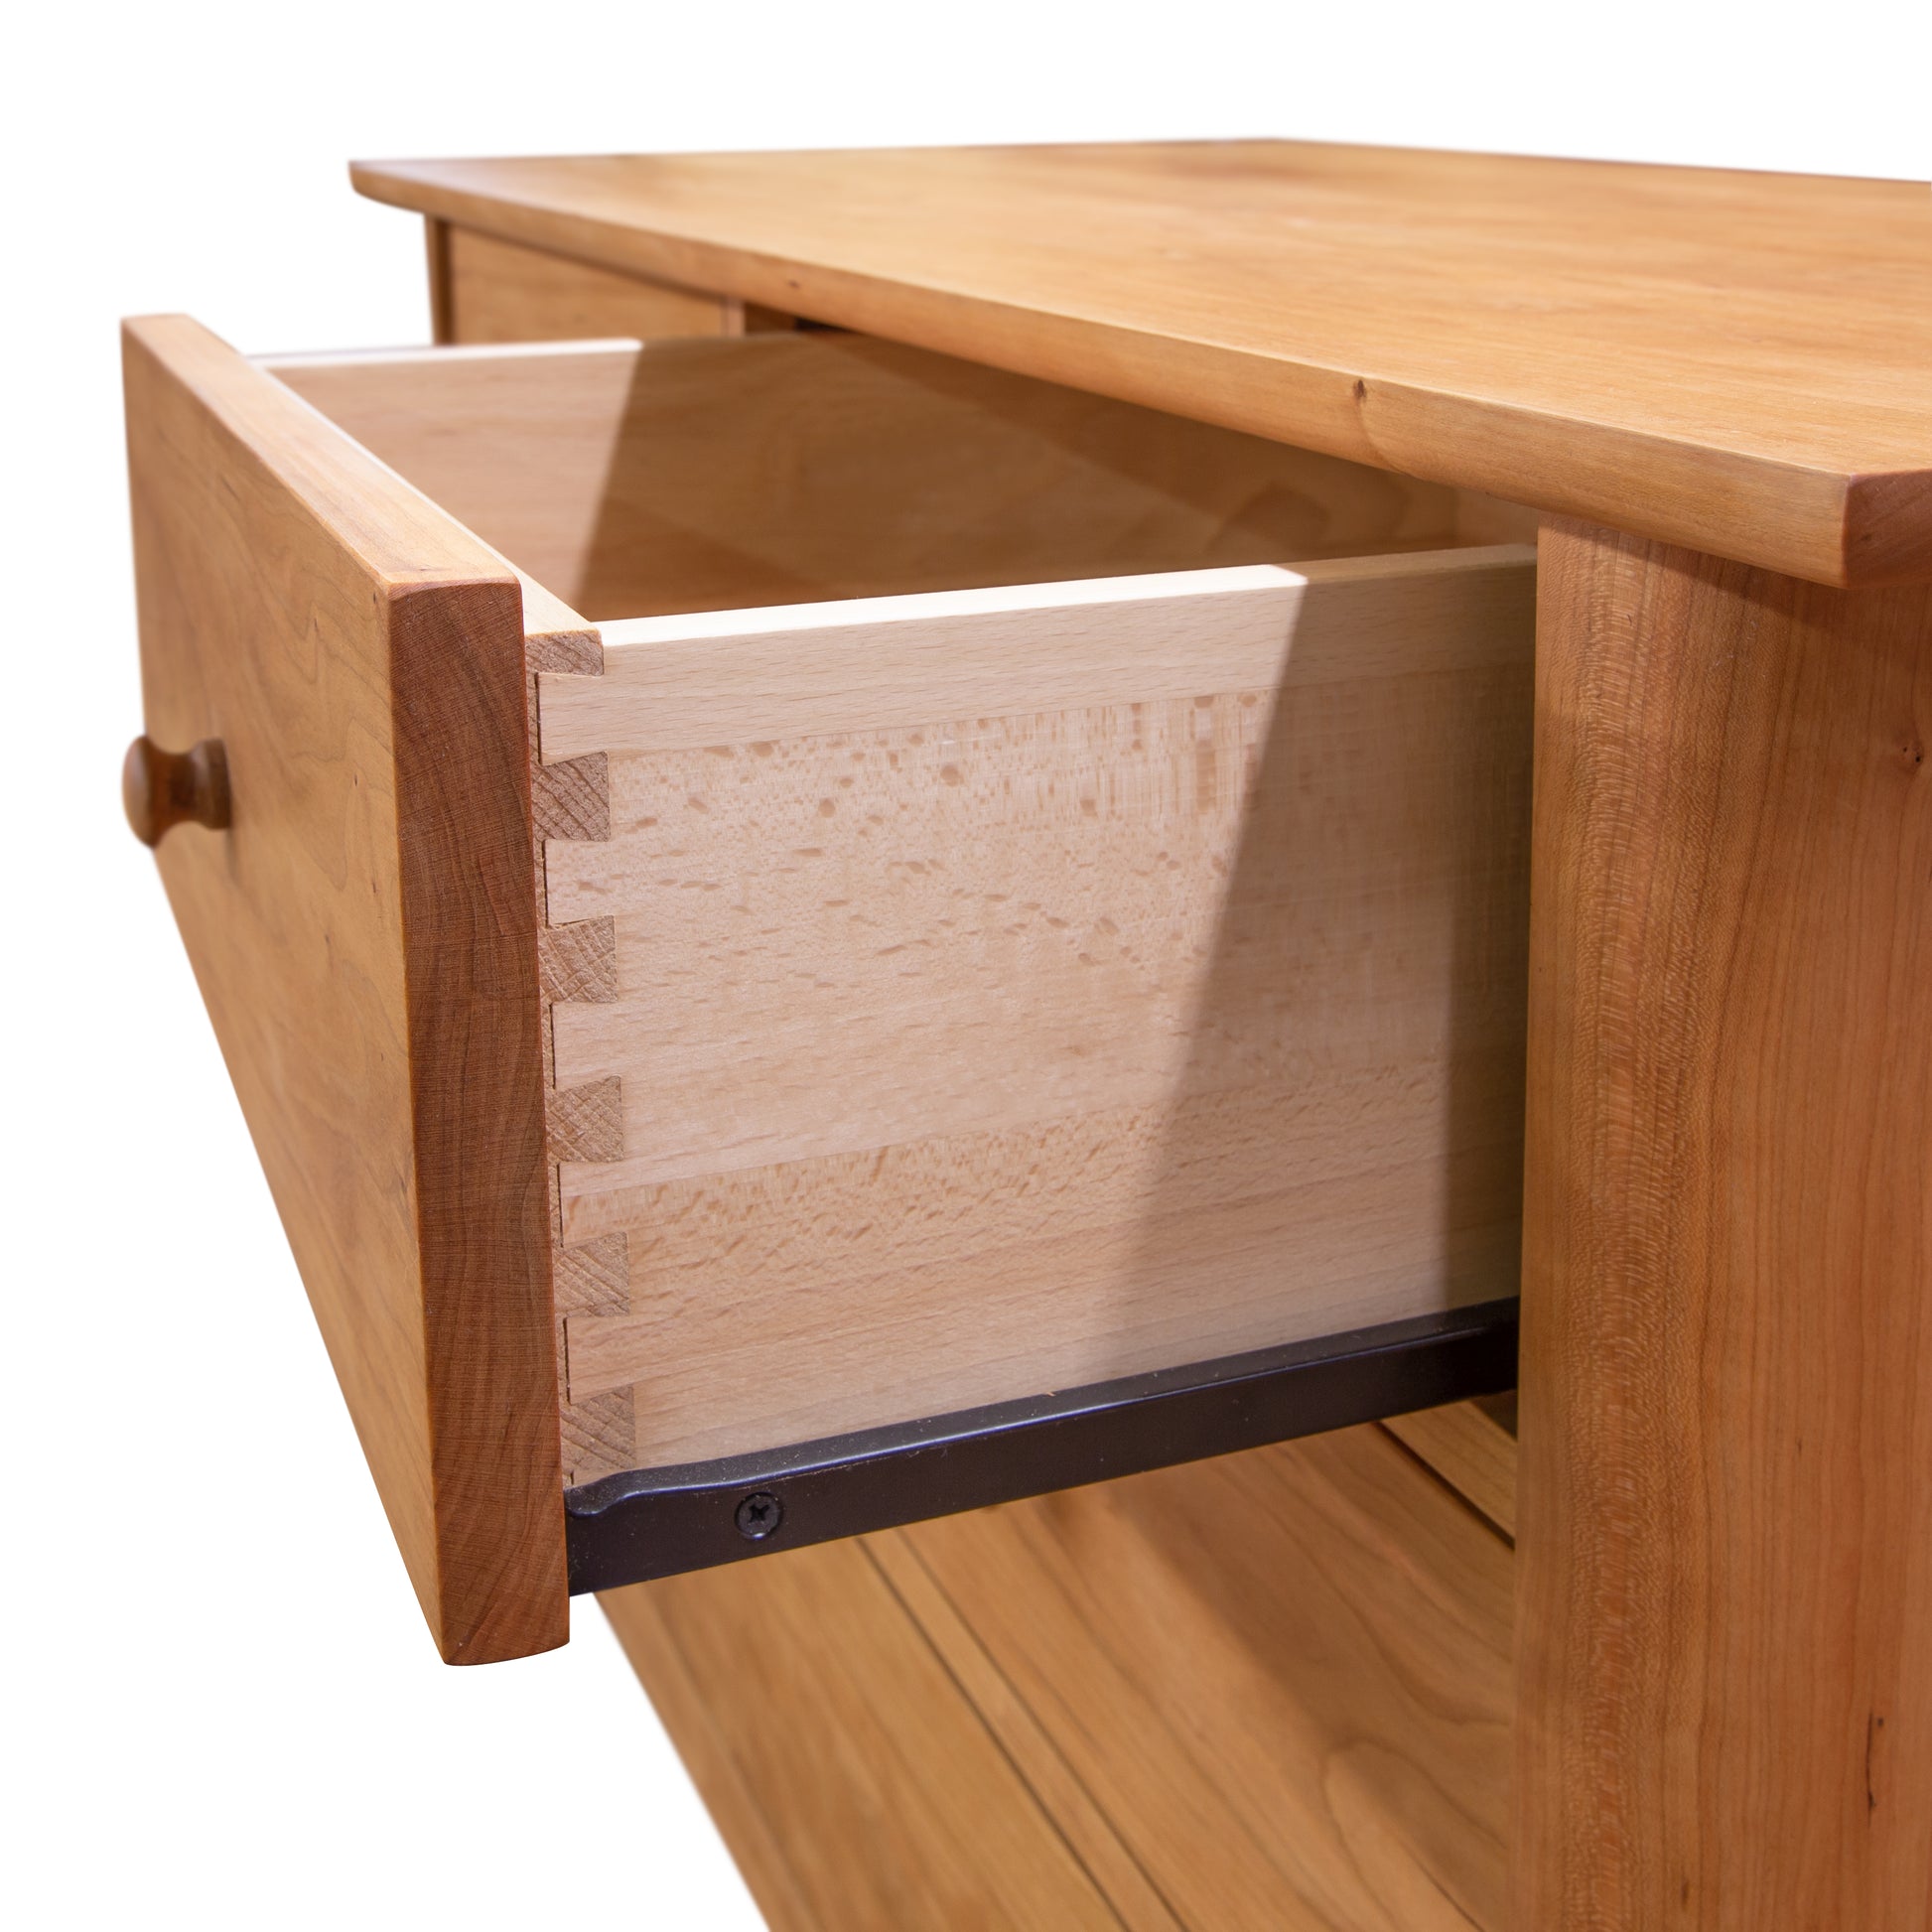 An open empty Heartwood Shaker 4-Drawer Dresser drawer, showing dovetail joinery on a light background.